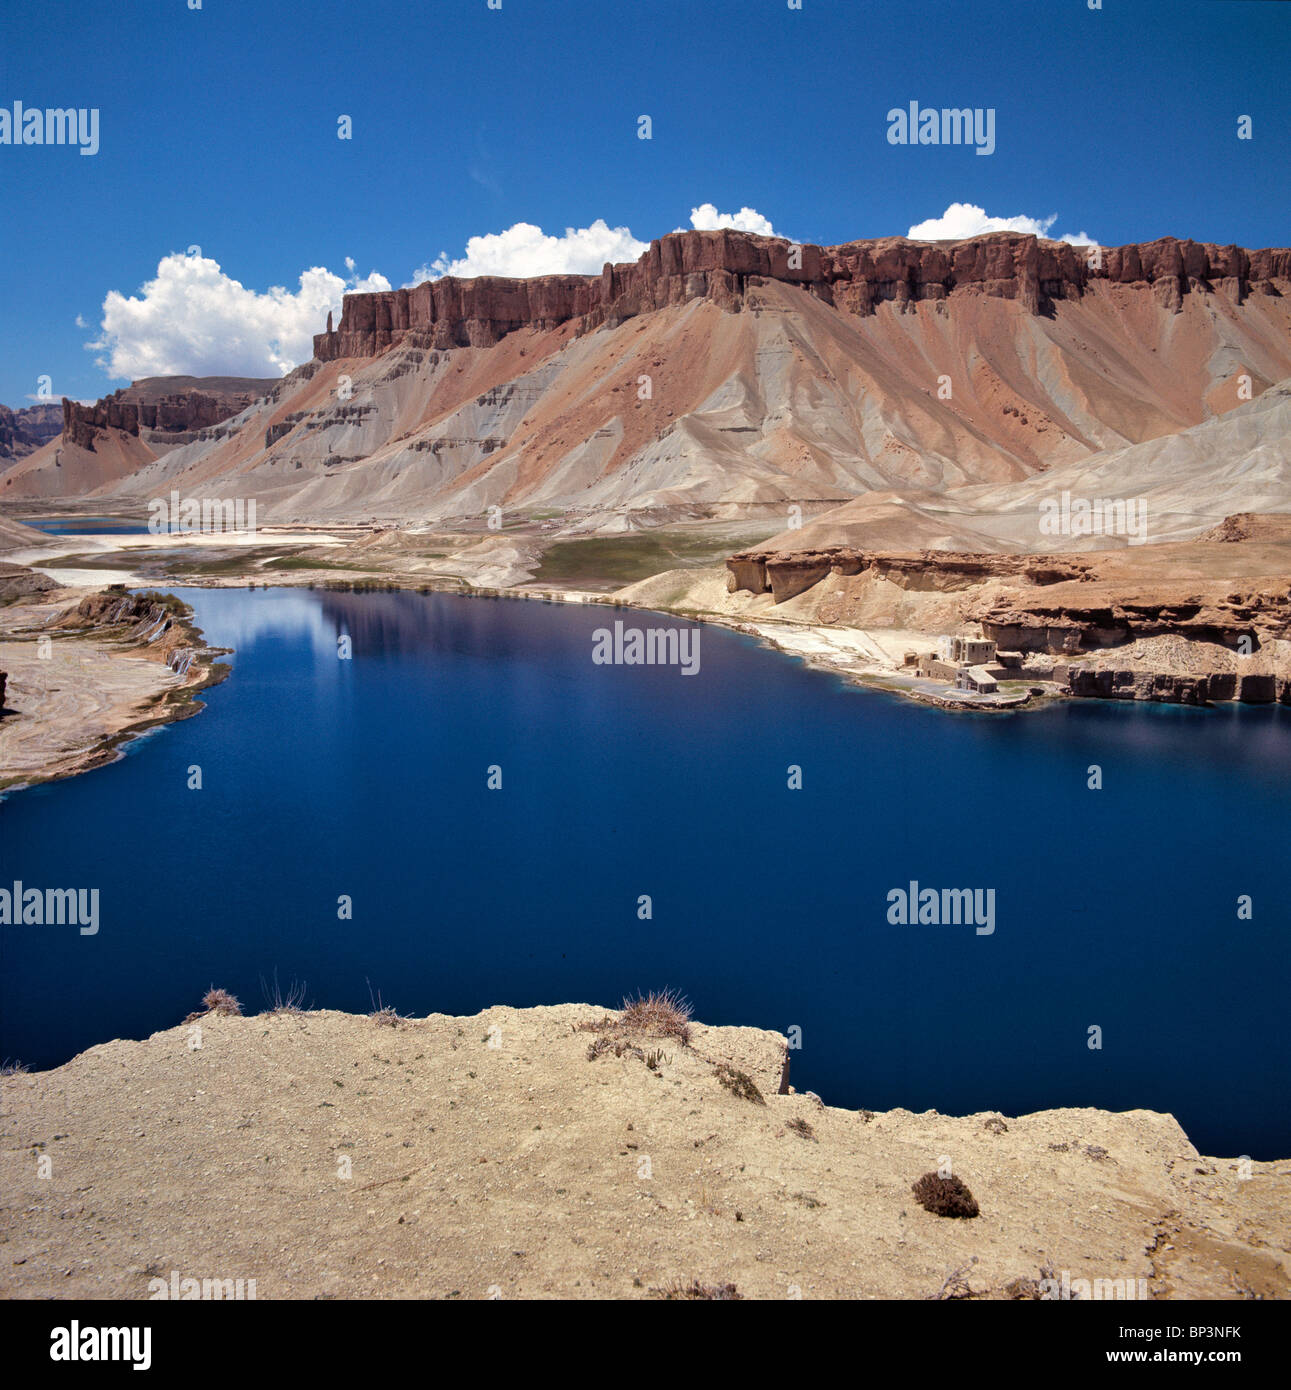 Afghanistan Band-i-Amir Lakes. A small village borders the sapphire waters of the Band-i-Amir Lakes near Bamian in Afghanistan. Stock Photo